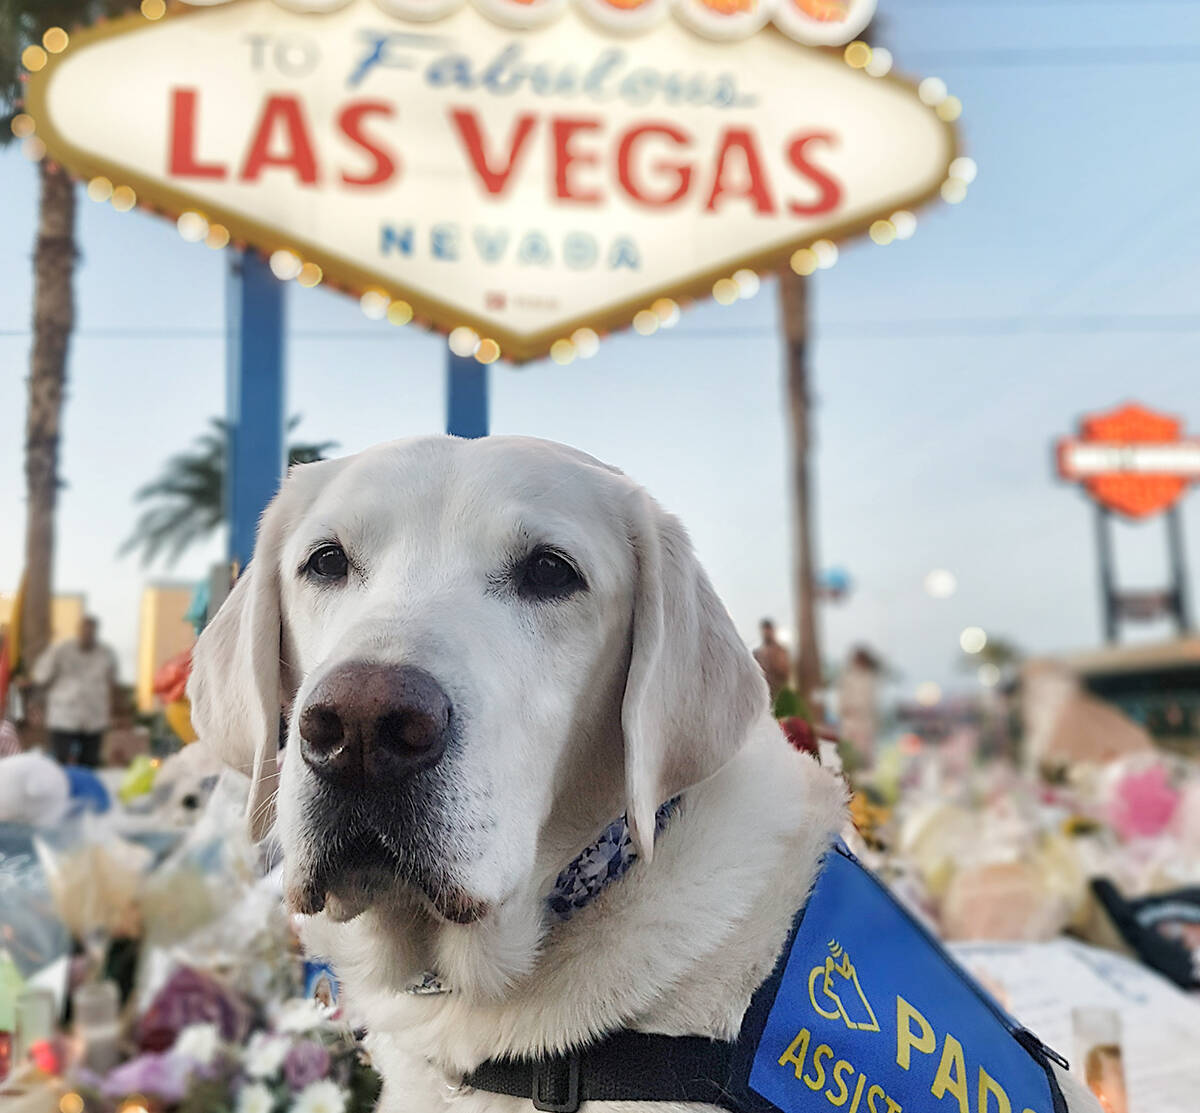 Caber, Delta Police Department’s trauma K9, travelled to Las Vegas to help comfort the victims of the Route 91 music festival shooting in 2017. Caber retired from duty in October of 2019, and passed away on Aug. 18, 2023 at 15 years old. (Kim Gramlich/Delta Police Department photo)